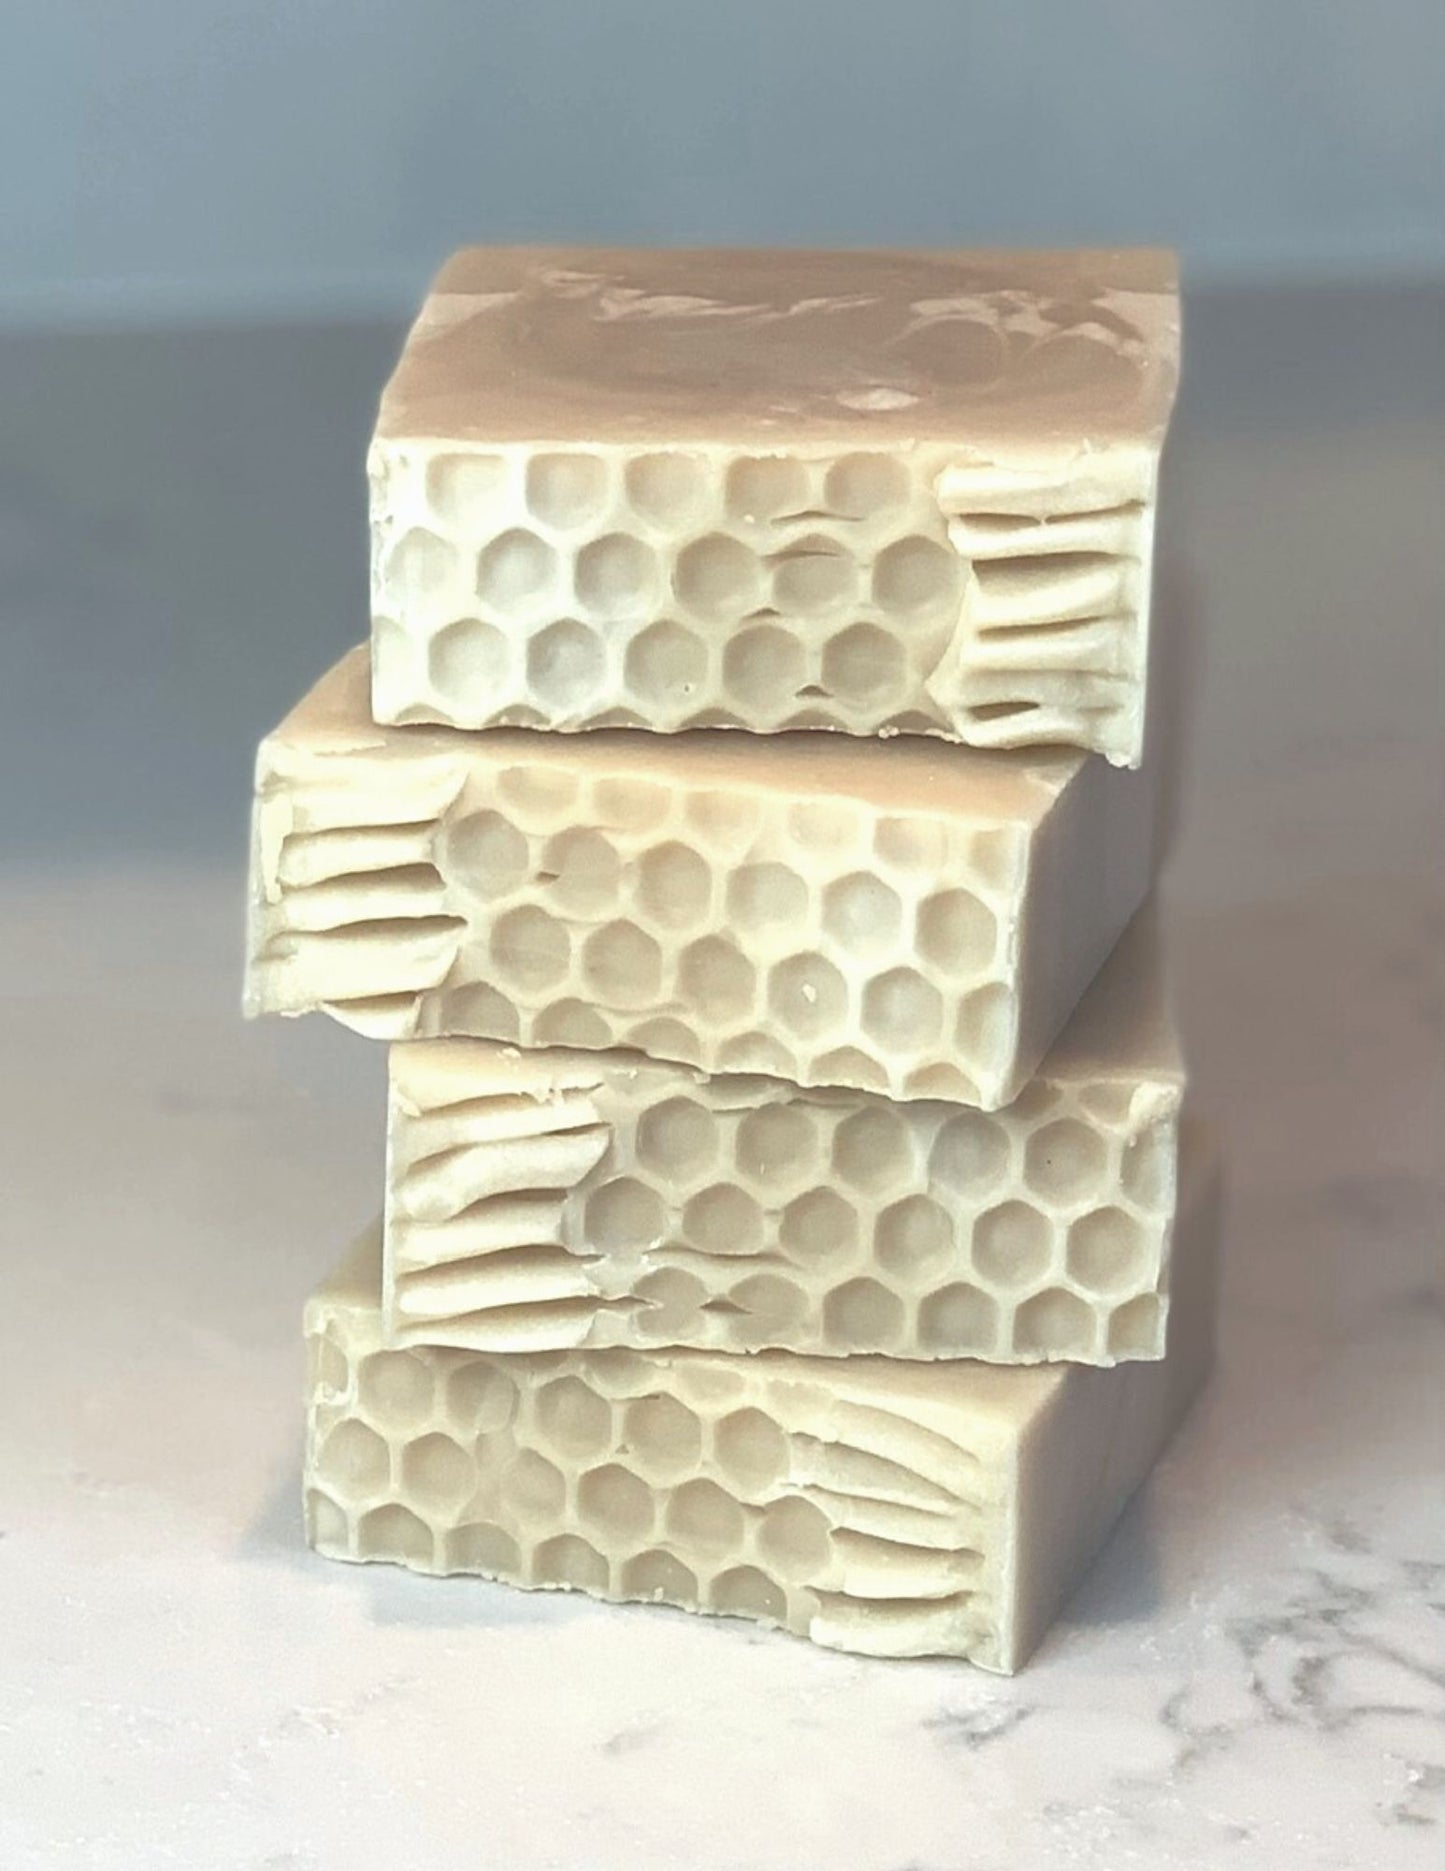 Stack of four triple butter honey soaps detailing honeycomb design on top. All soap is sitting on a marble counter with white background.